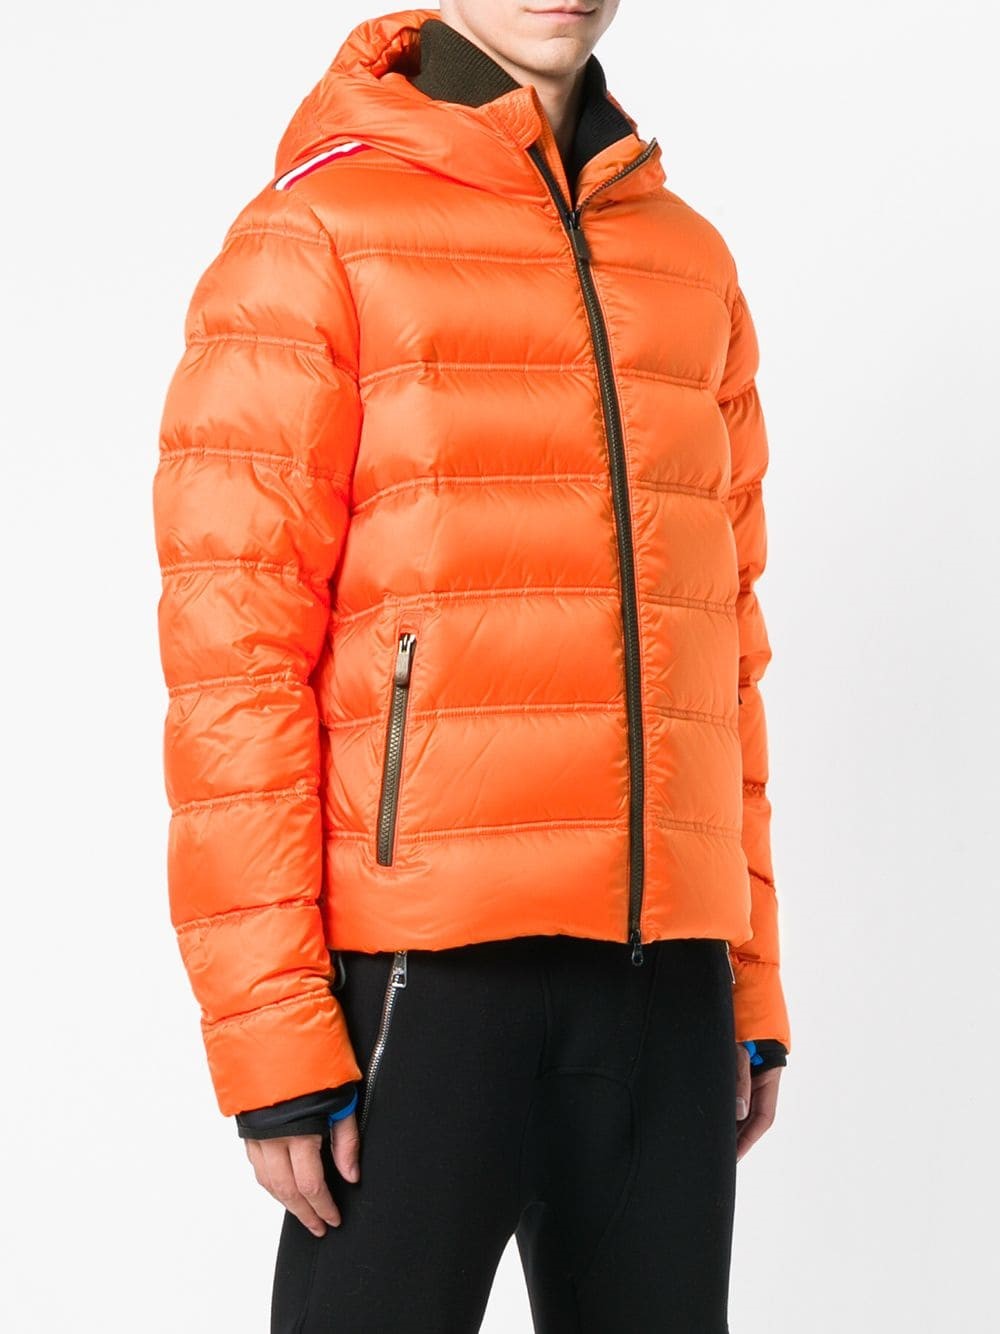 rossignol CESAR JACKET available on montiboutique.com - 24924